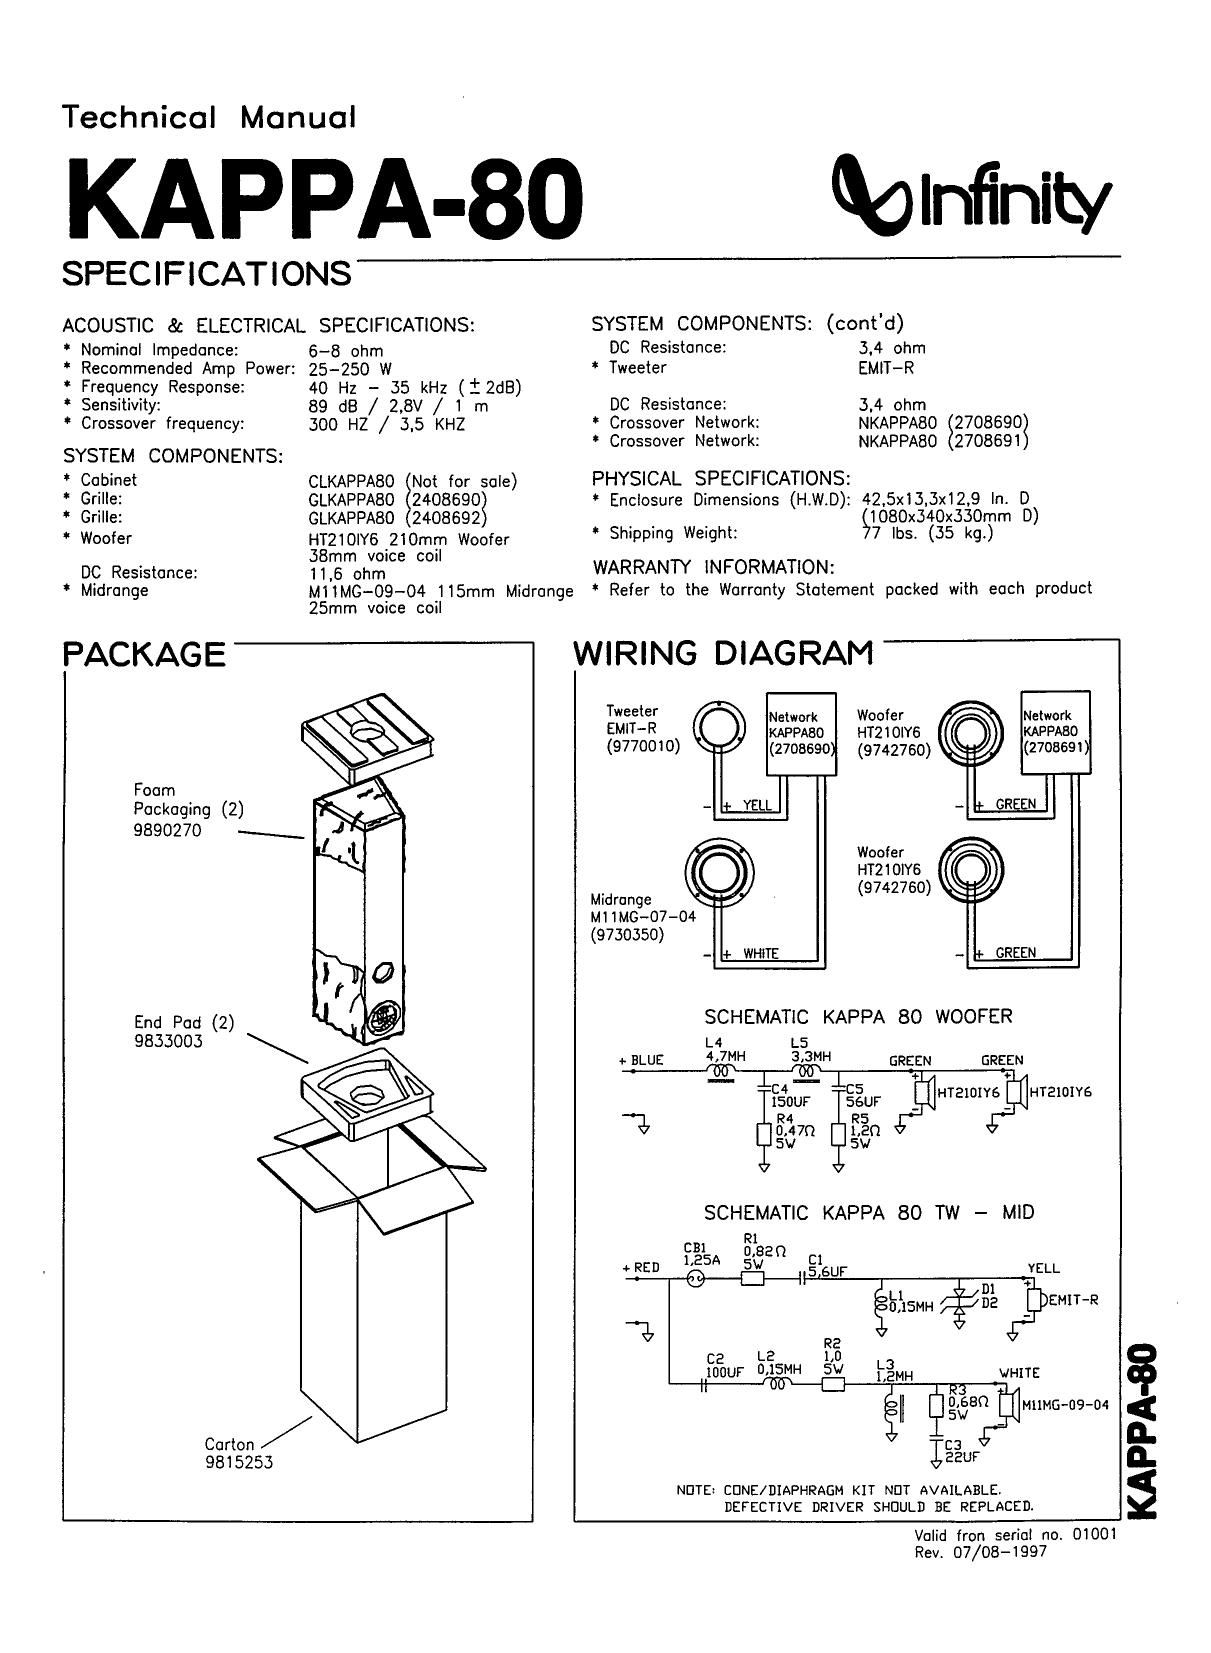 Free Service Manuals - Free download Infinity Kappa 80 Technical Manual